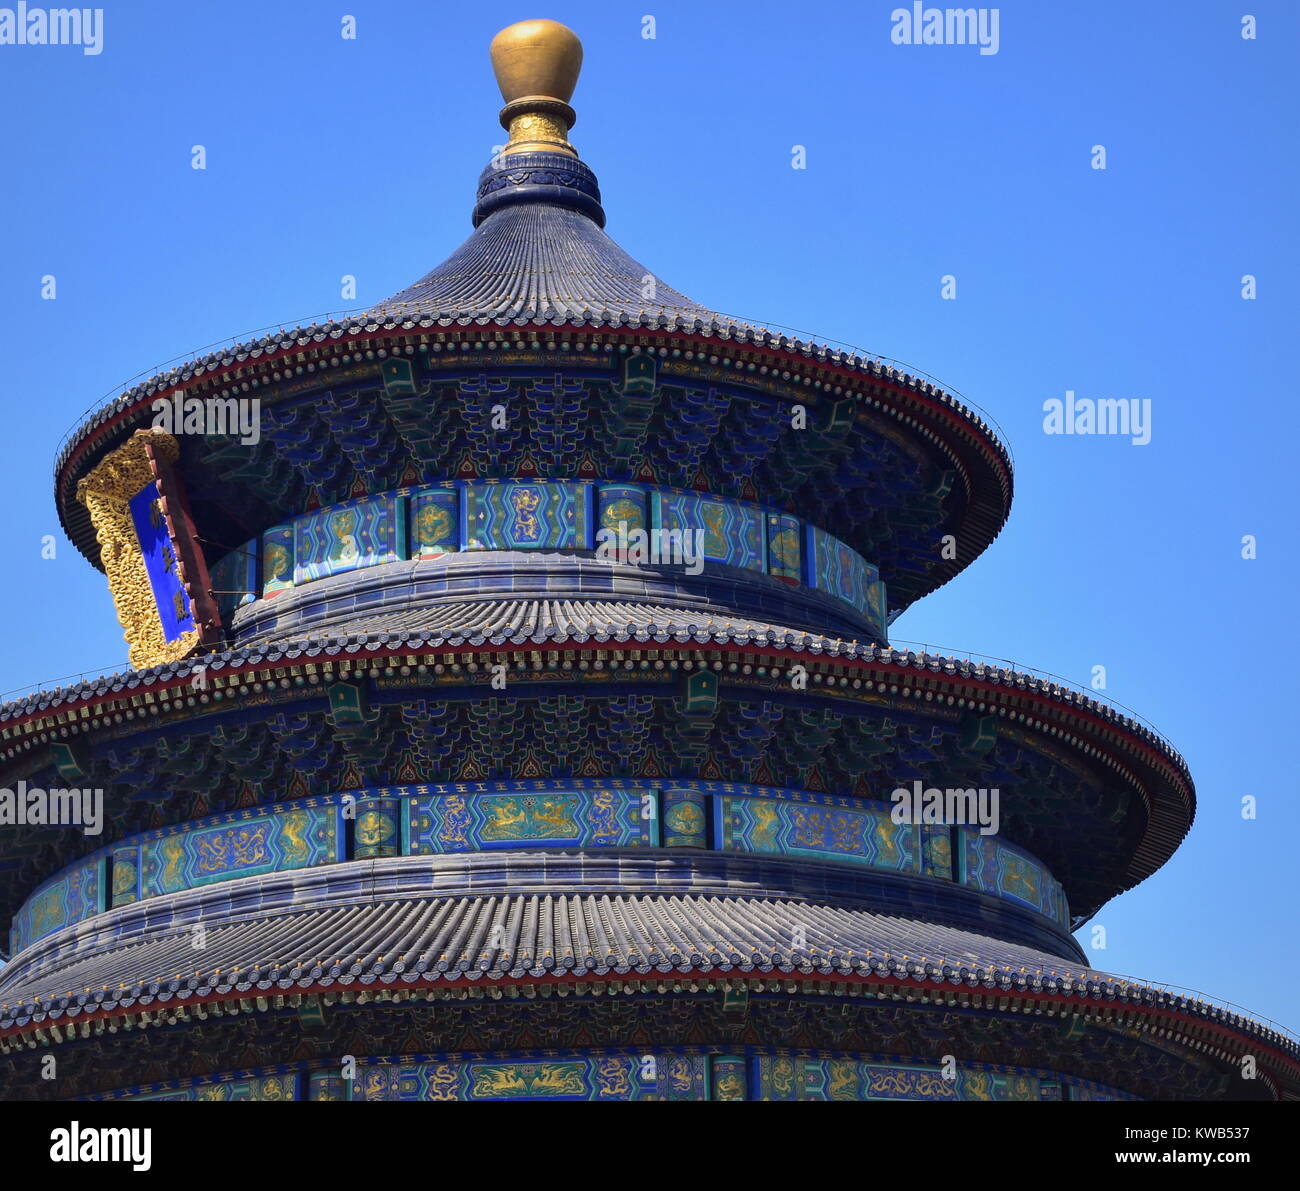 Beijing Temple of Heaven roof close up on Chinese traditional architecture Stock Photo